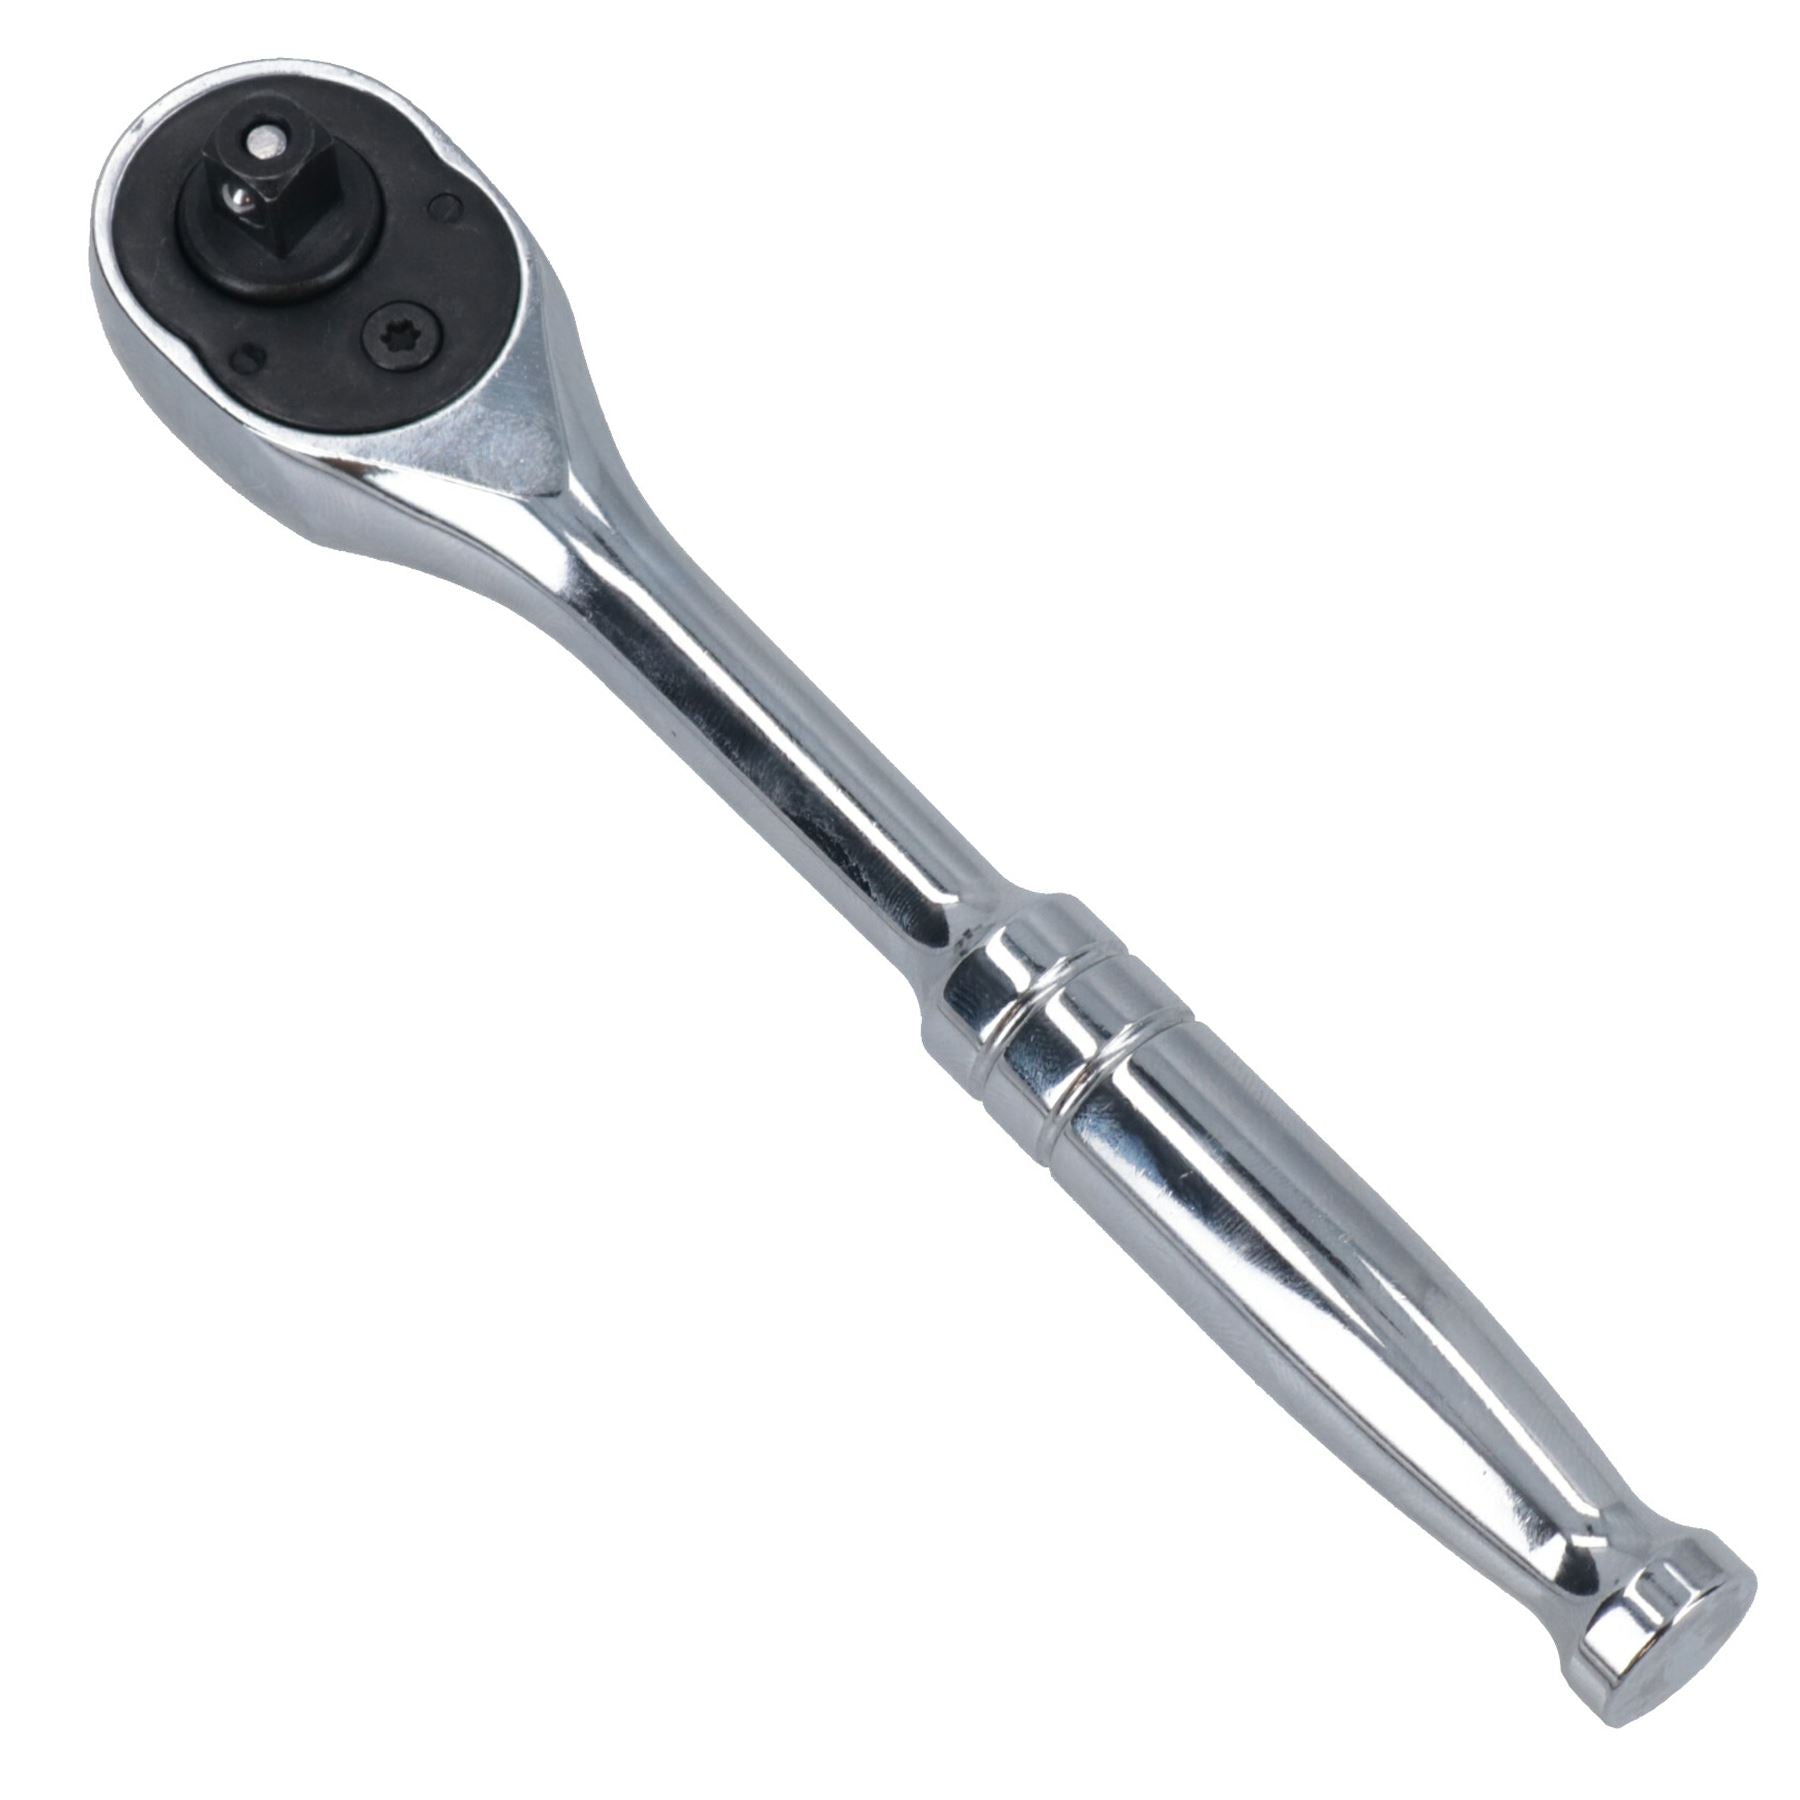 1/4in. Drive Ratchet With Straight Handle 90 Teeth Quick Release Reversible